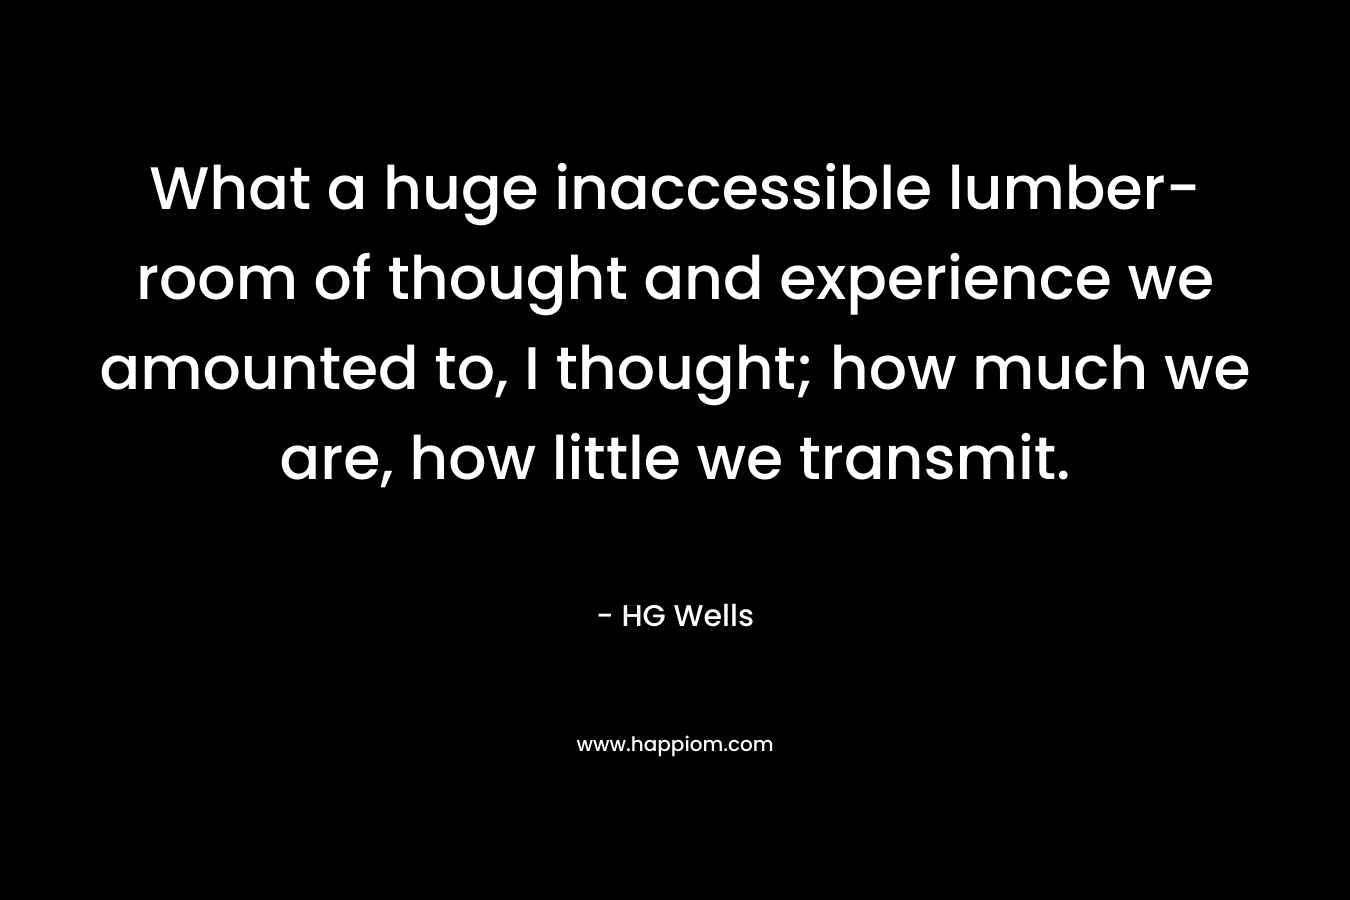 What a huge inaccessible lumber-room of thought and experience we amounted to, I thought; how much we are, how little we transmit.